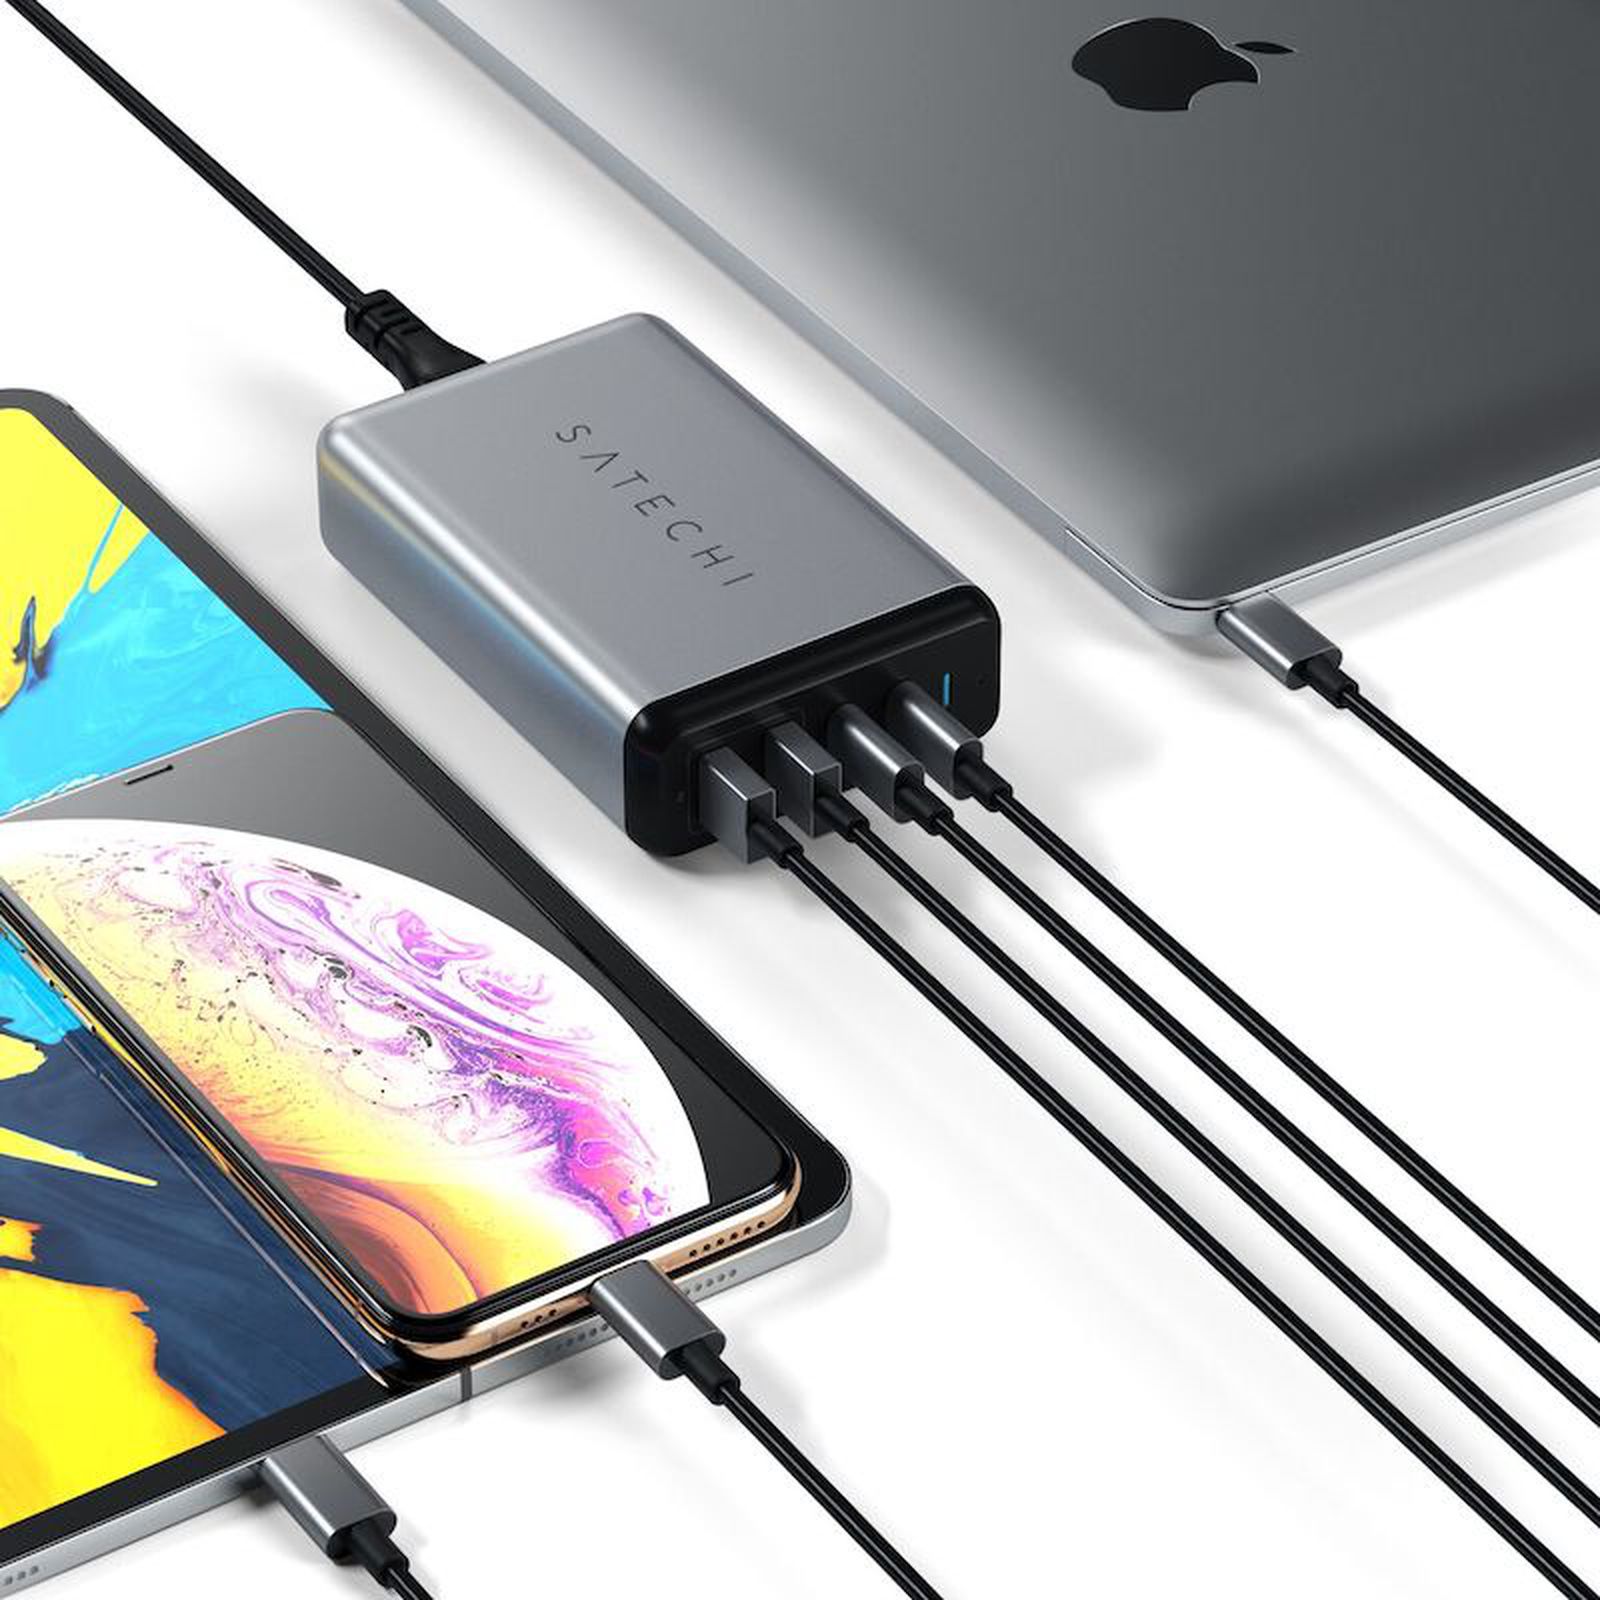 CES 2019: Satechi Launches New Multi-Port USB-C Chargers Ideal for Latest  iPad Pro, MacBook Air, and More - MacRumors